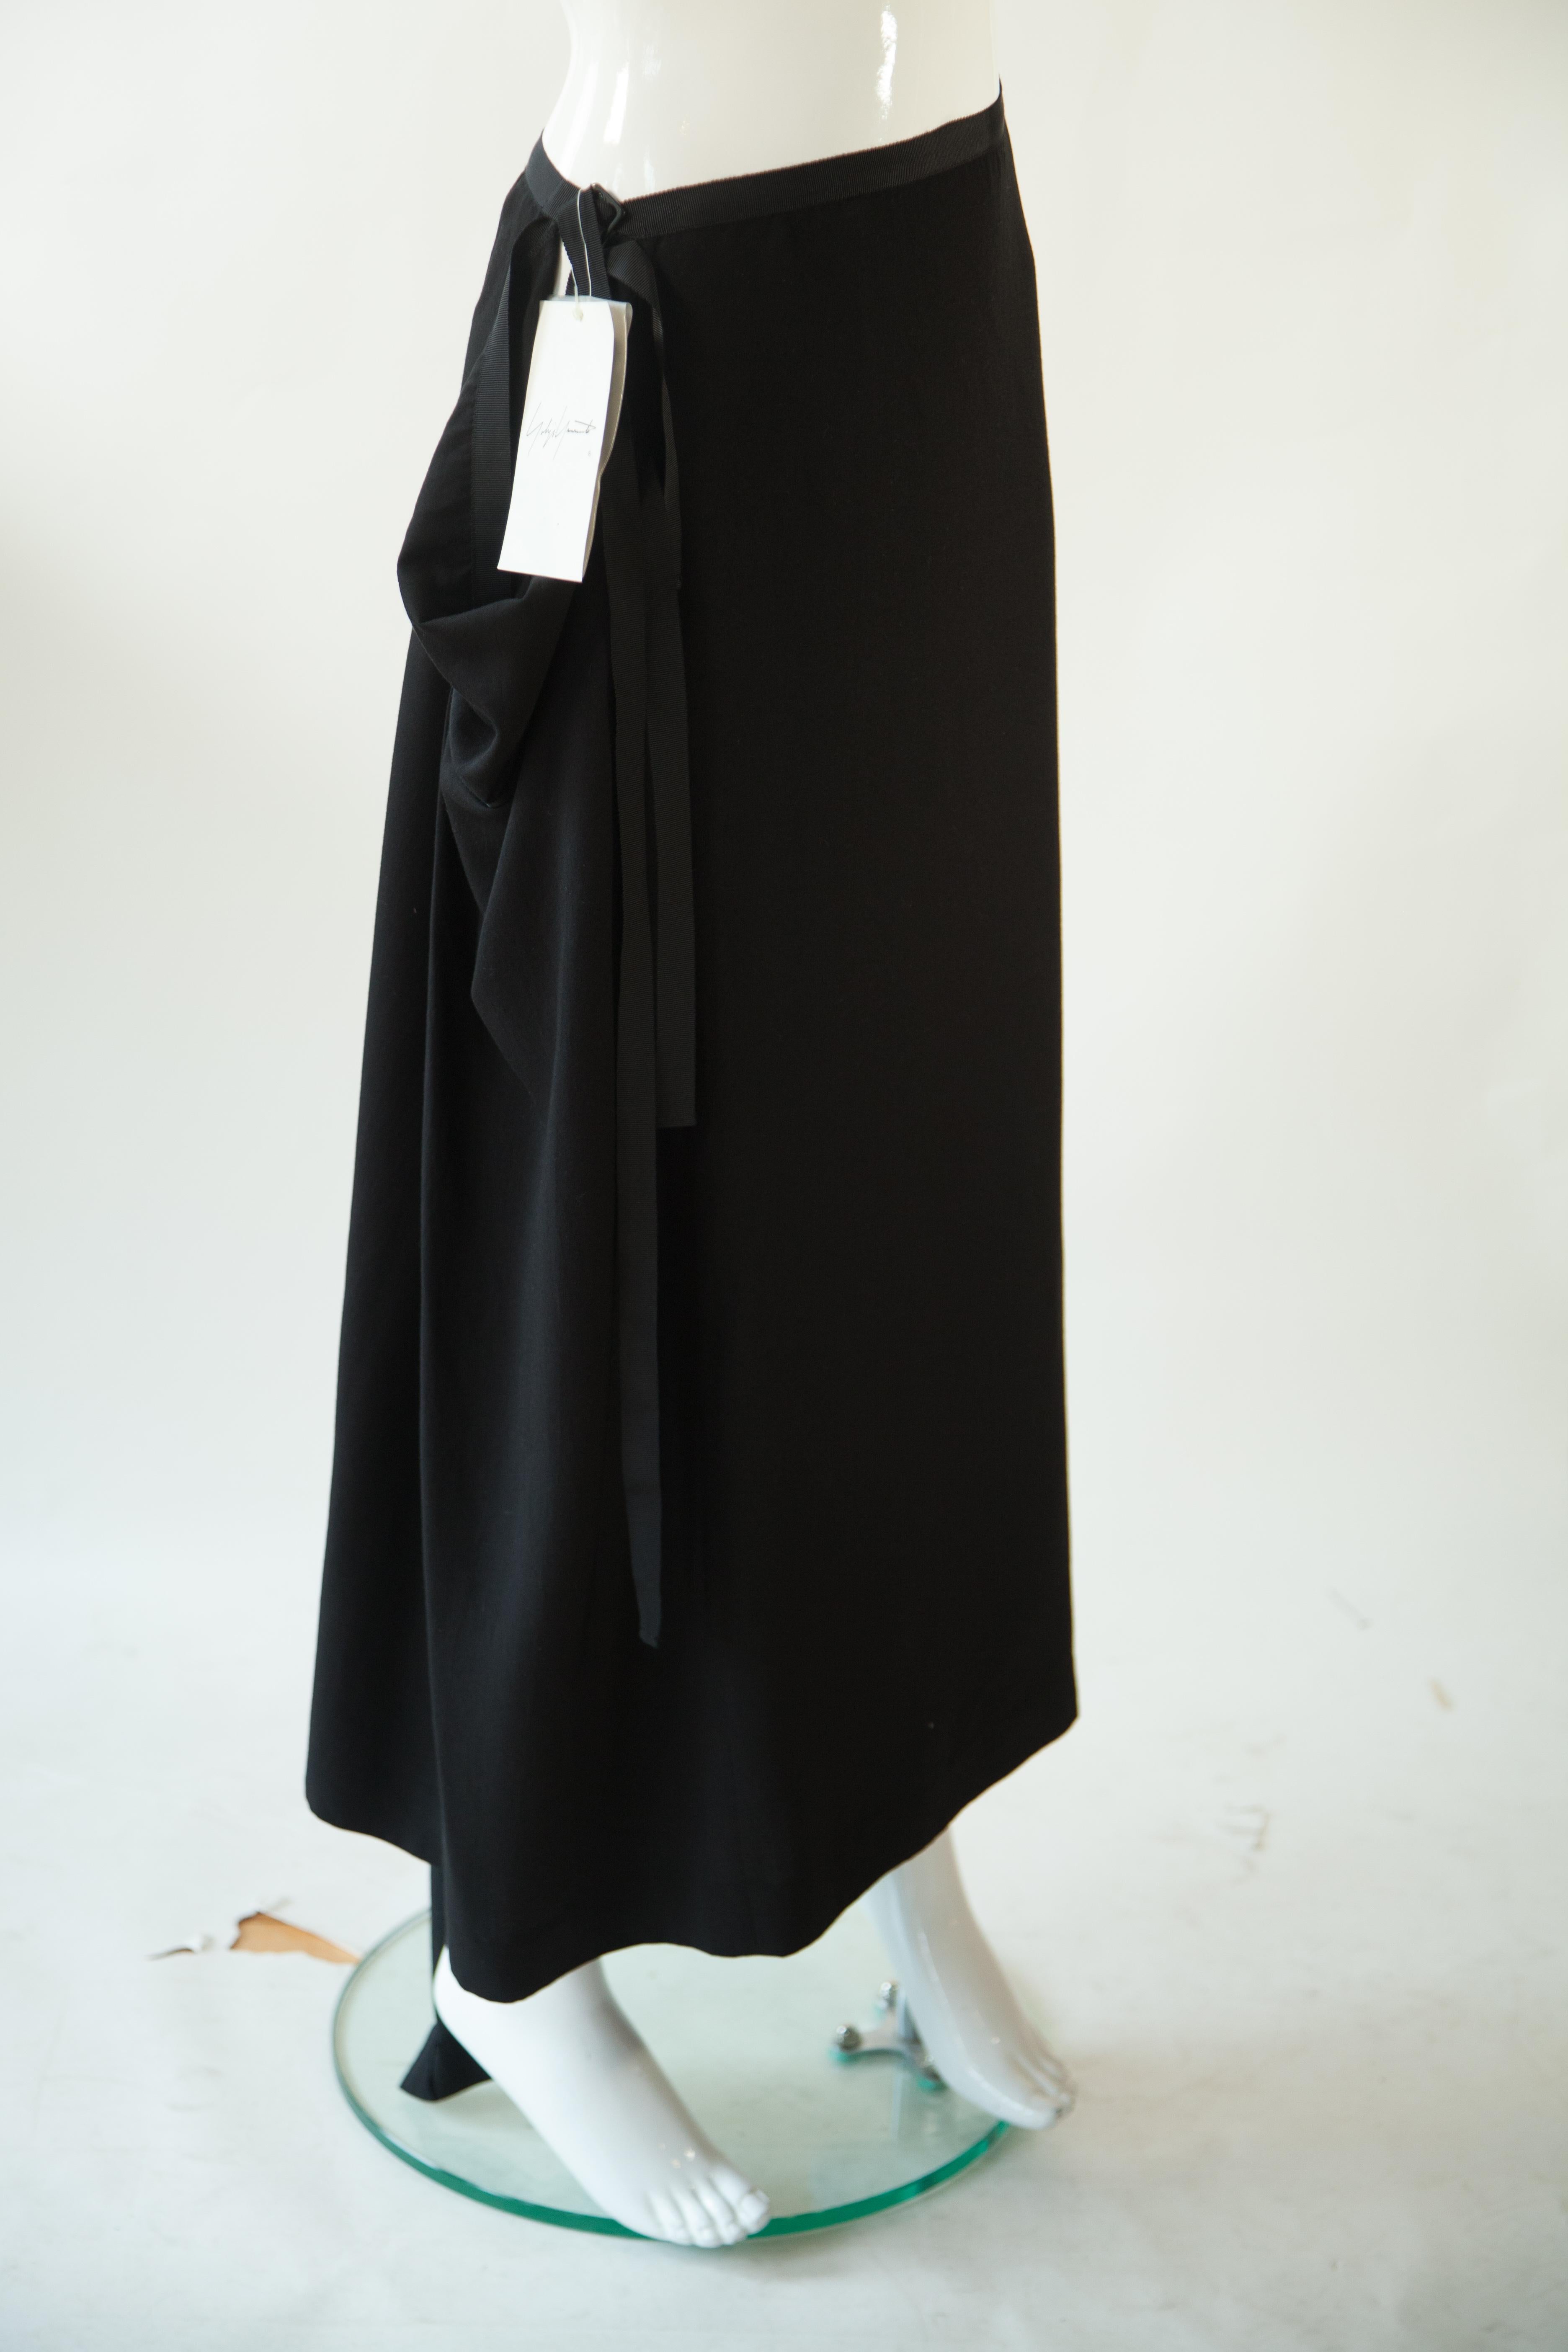 Yohji Yamamoto, Black Multi-Functional Shift Dress and Skirt In Excellent Condition For Sale In Kingston, NY